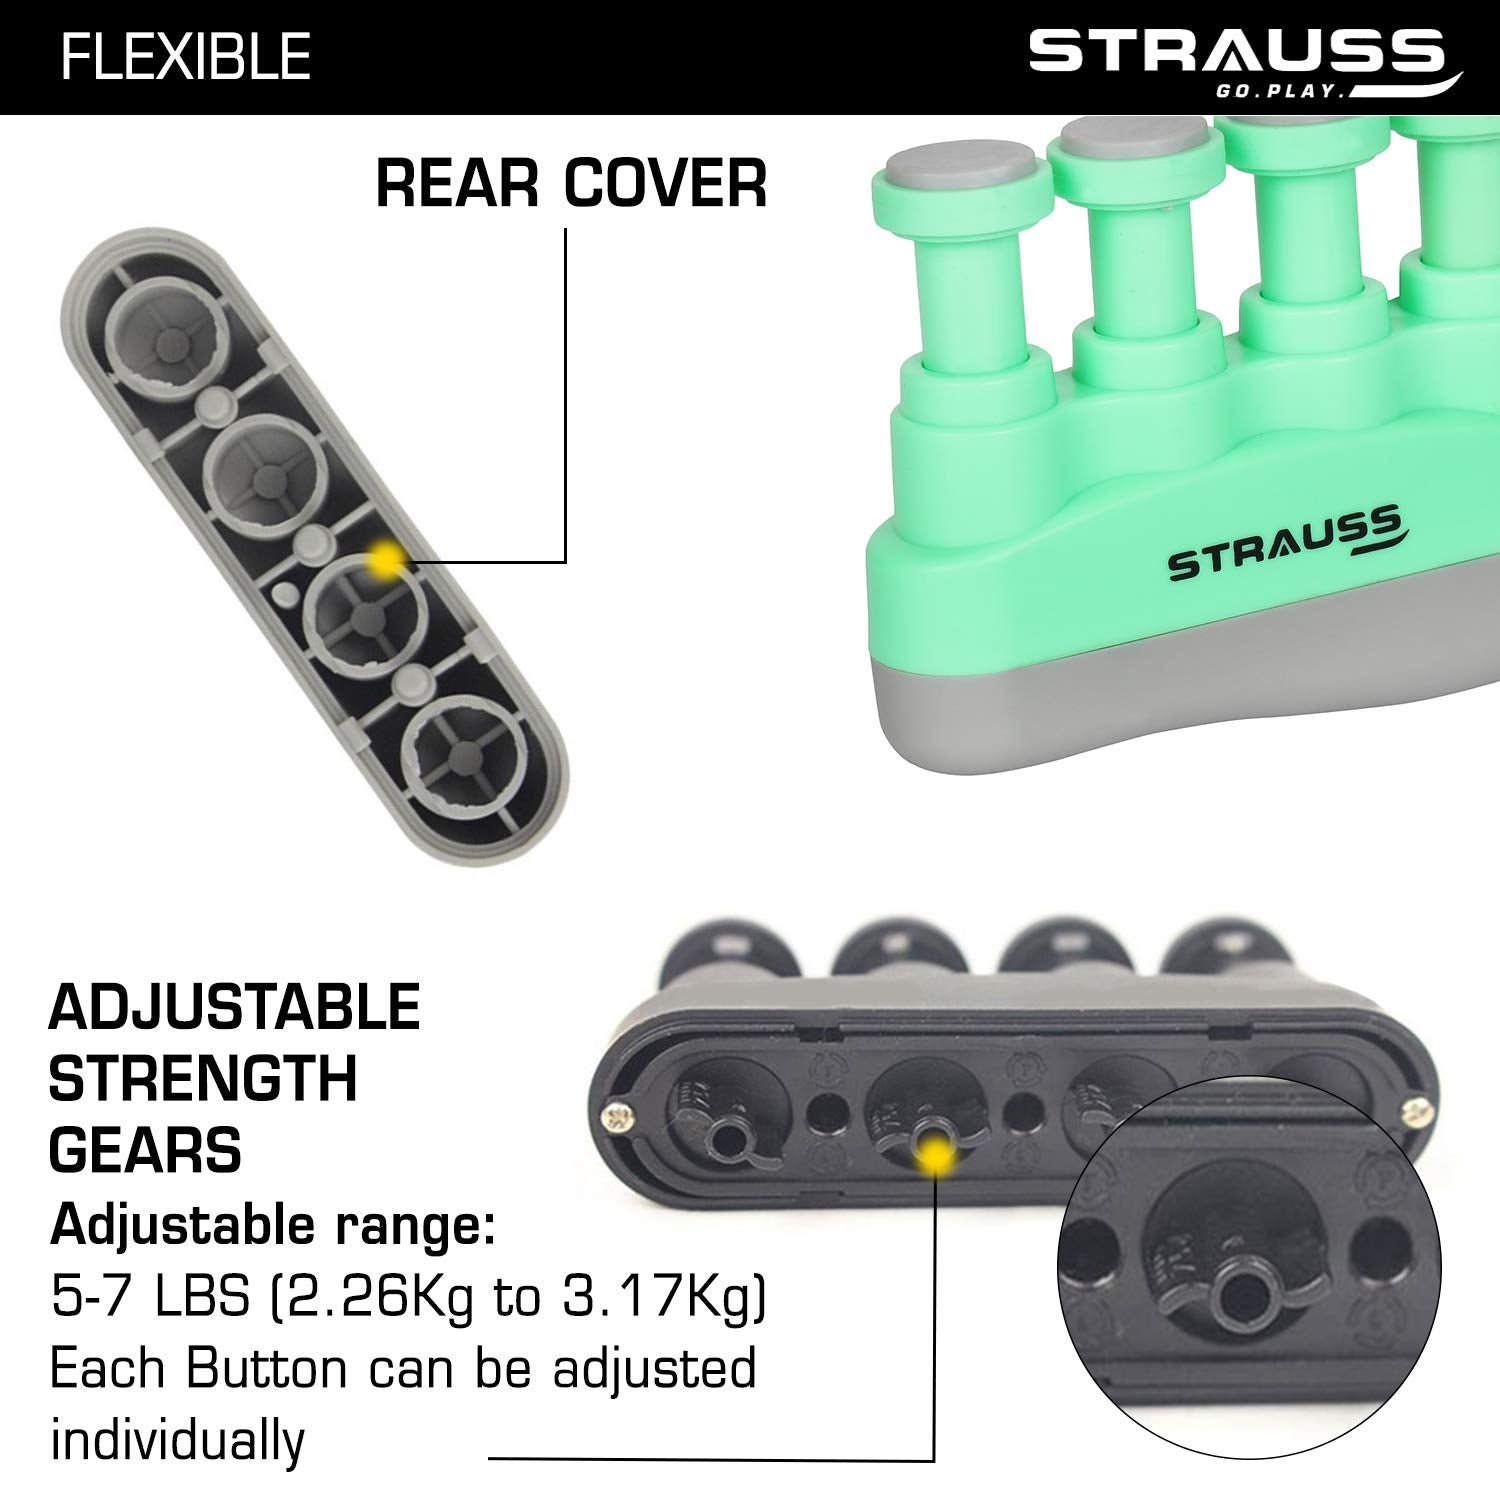 Strauss Adjustable Finger Hand Grip, (Green) Hand Grip Strengthener Strengthens Fingers, Hands, Wrists and Forearms - Best for Climbing, Golf & Tennis Grip Power, Hand Therapy